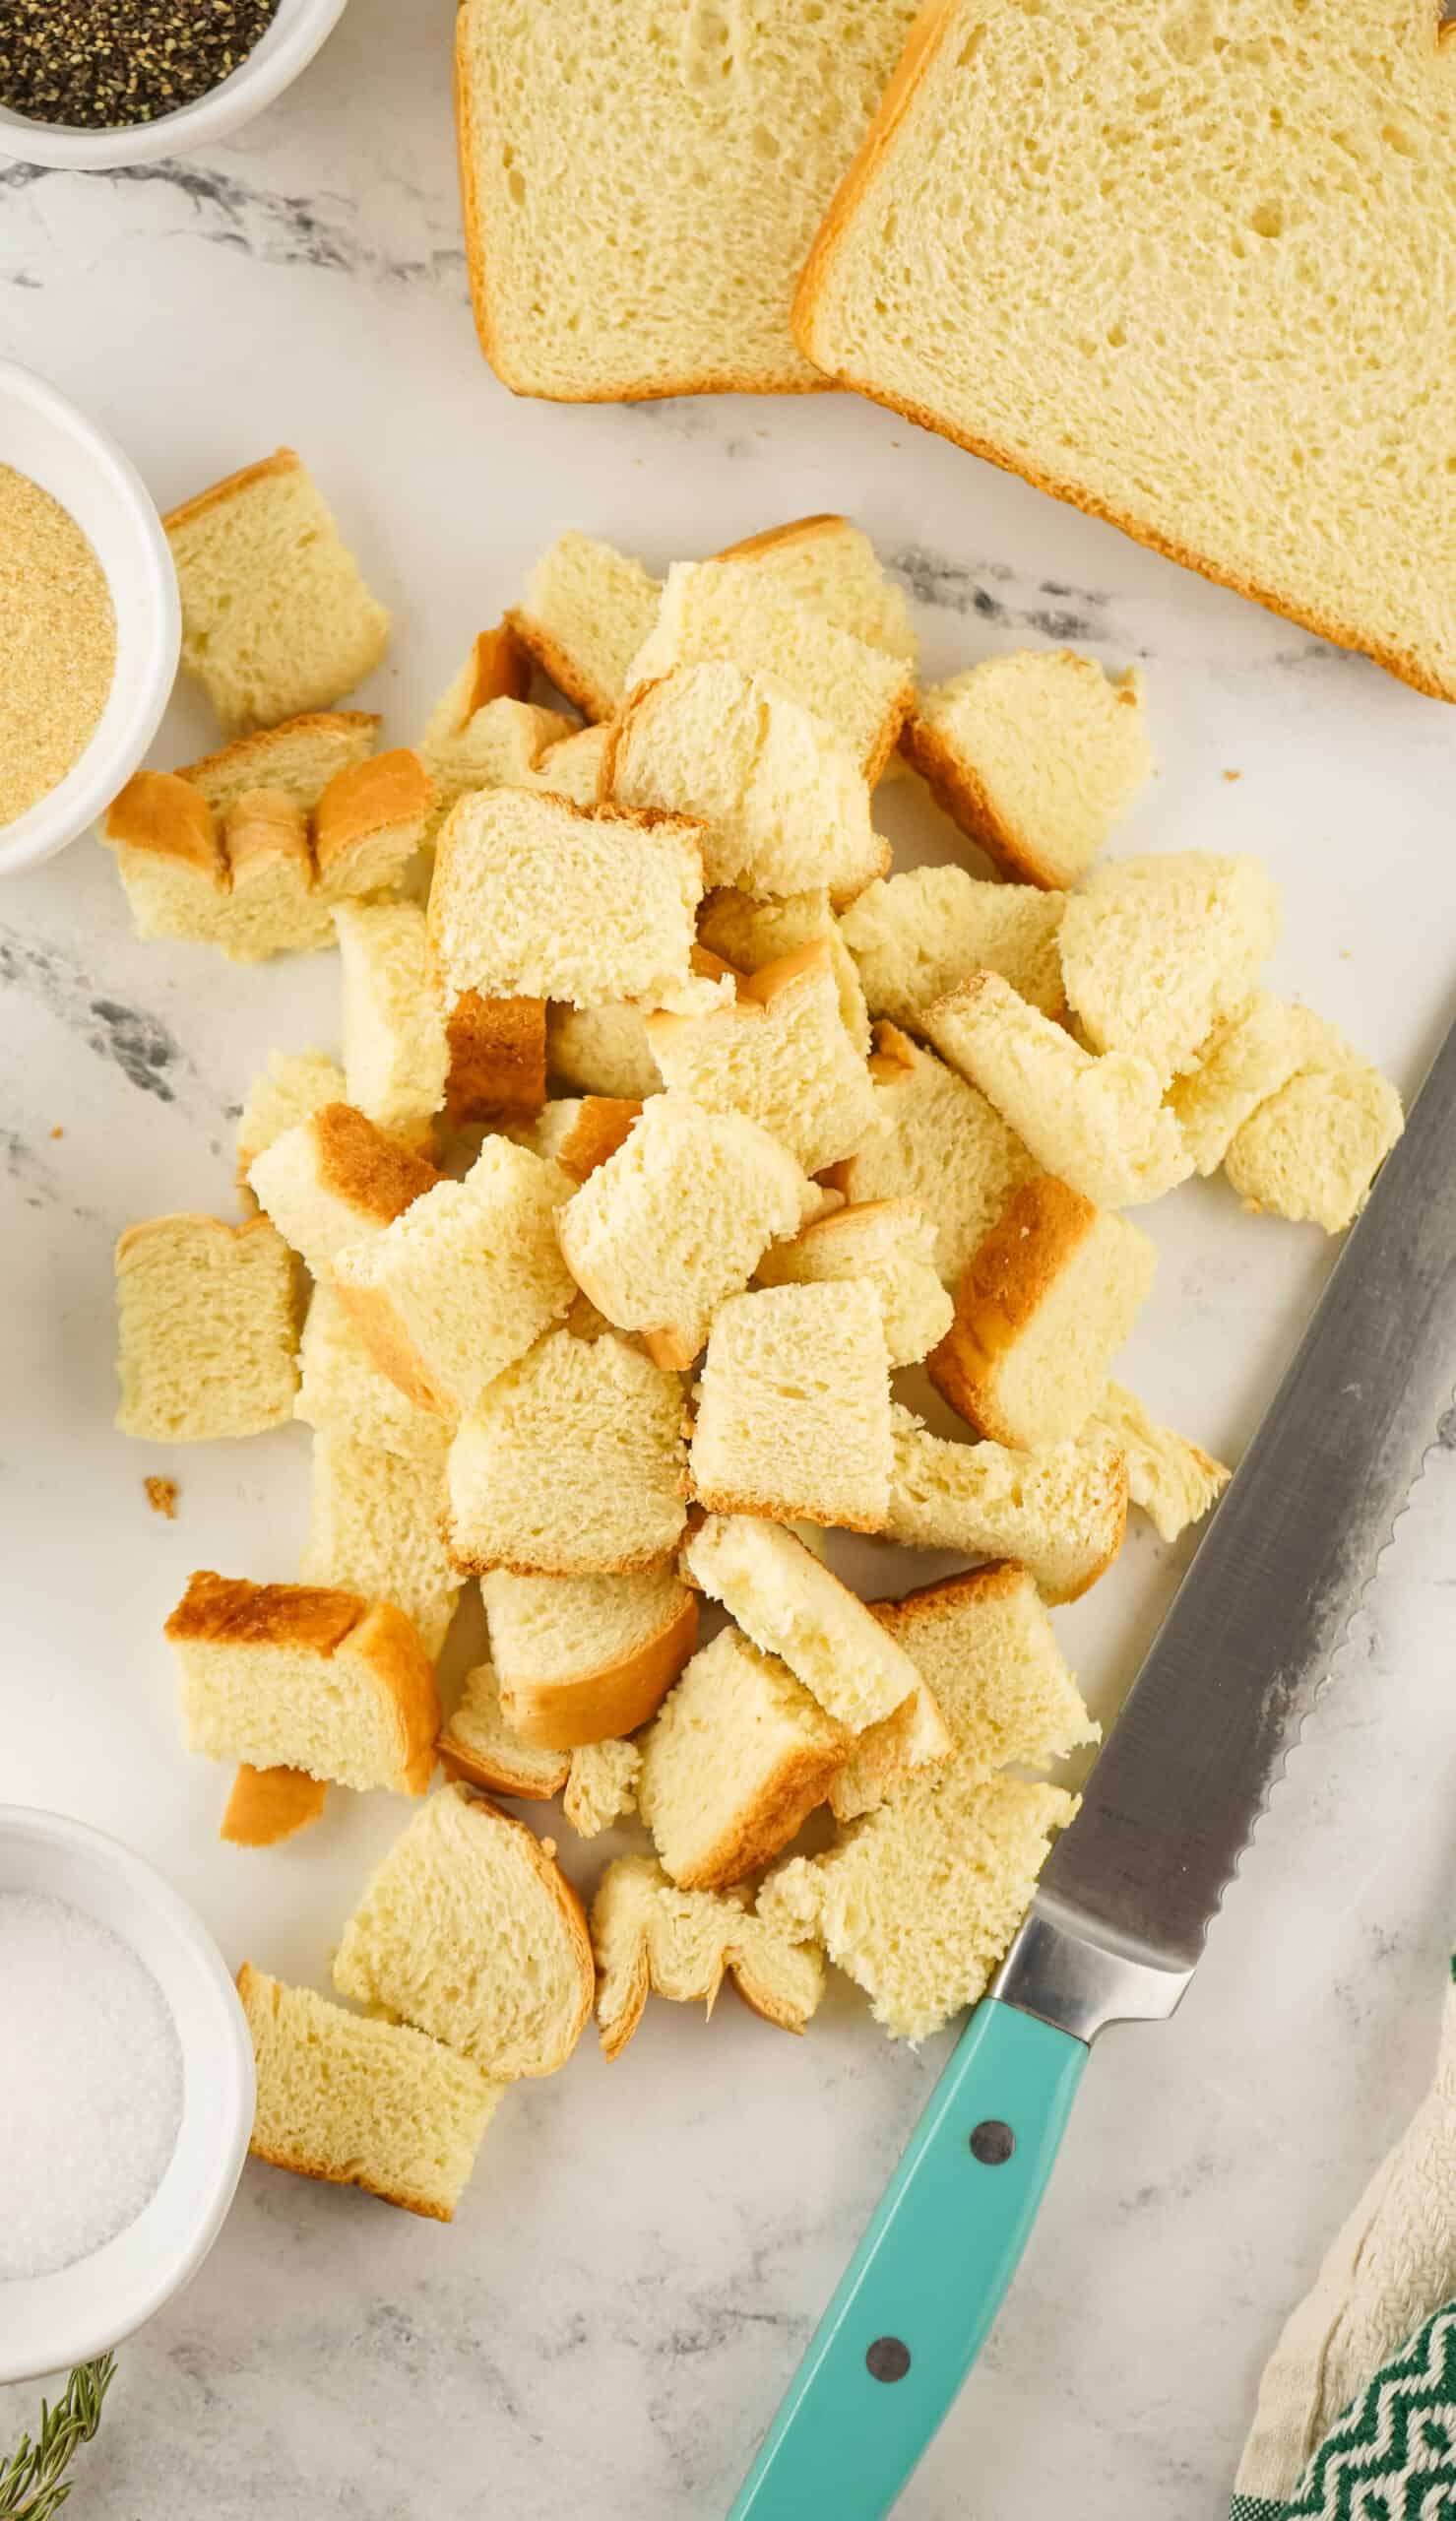 bread being cut into one inch cubes to make croutons